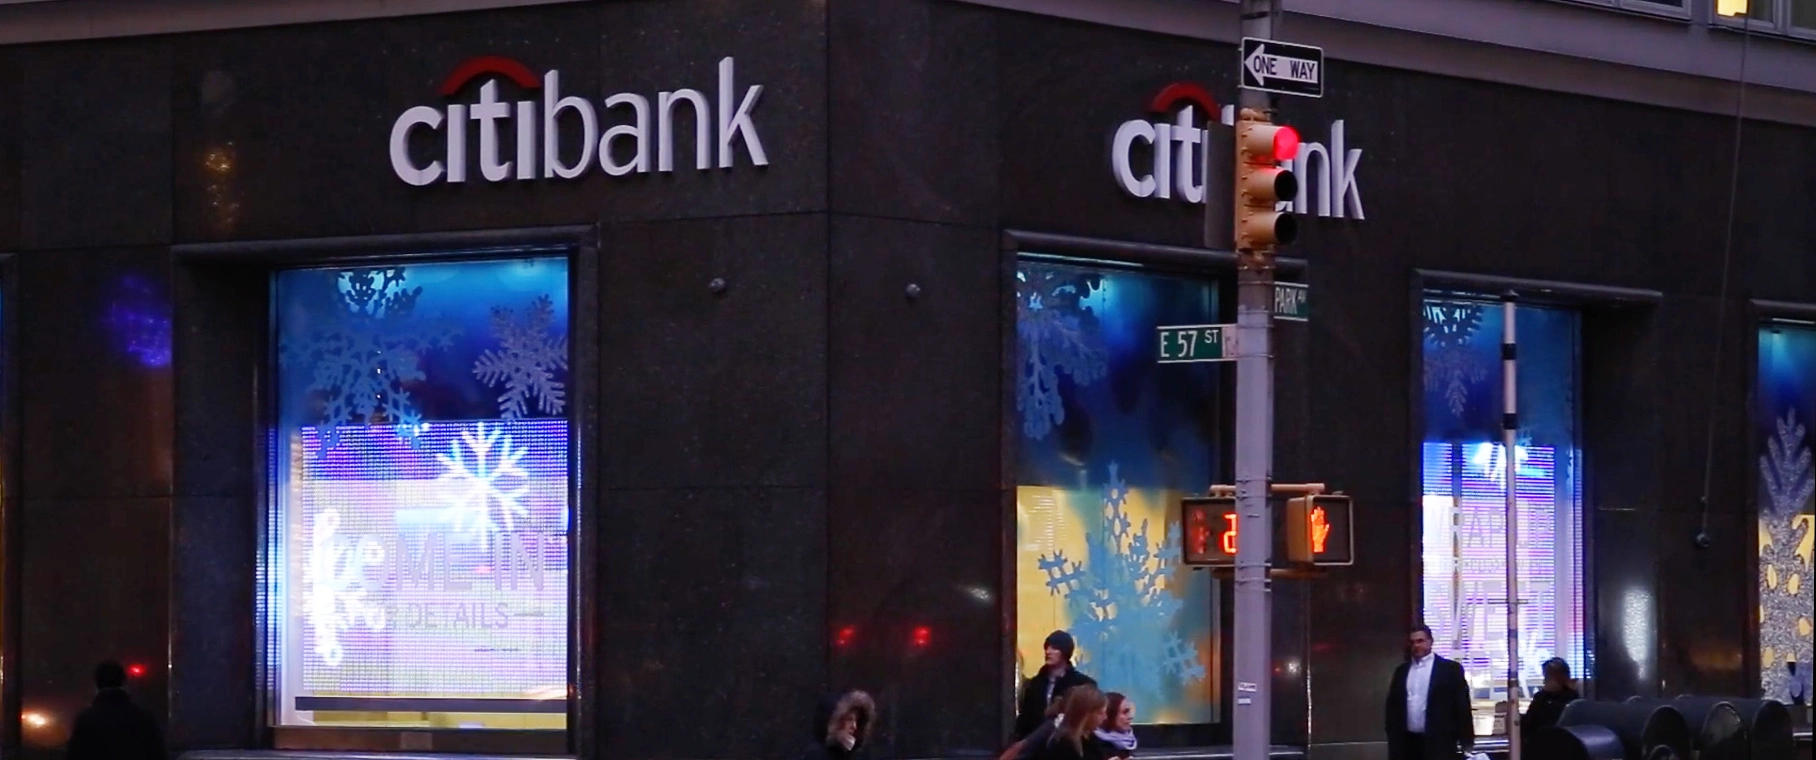 CITIBANK HOLIDAY TAKEOVER WINDOW LIGHT SHOW – Outform